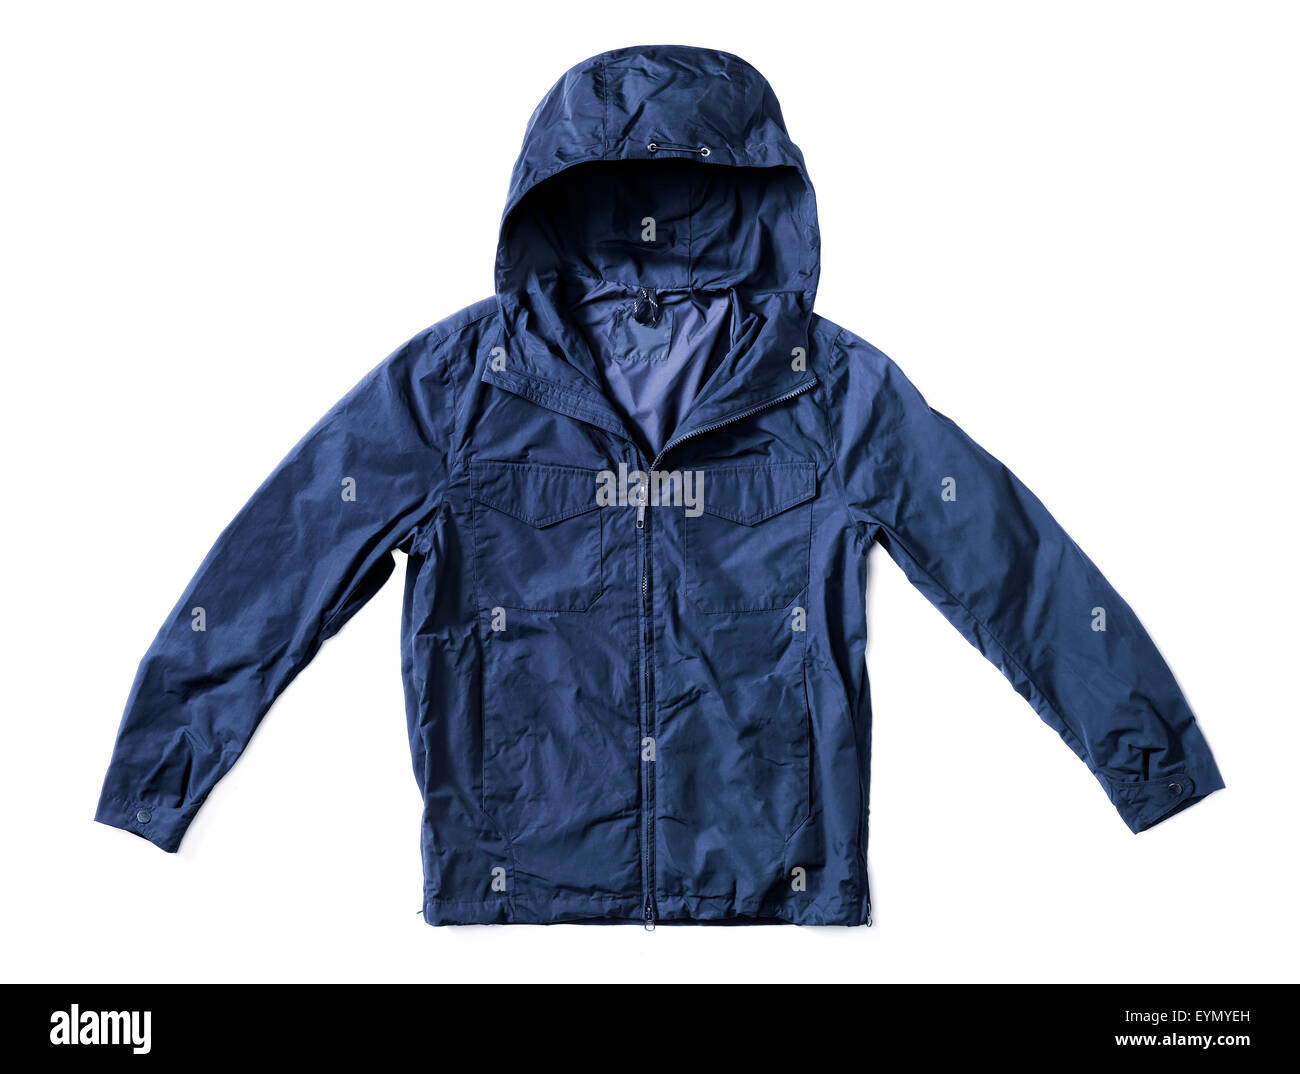 Men's dark blue hooded windproof jacket isolated on white with natural shadows. Stock Photo